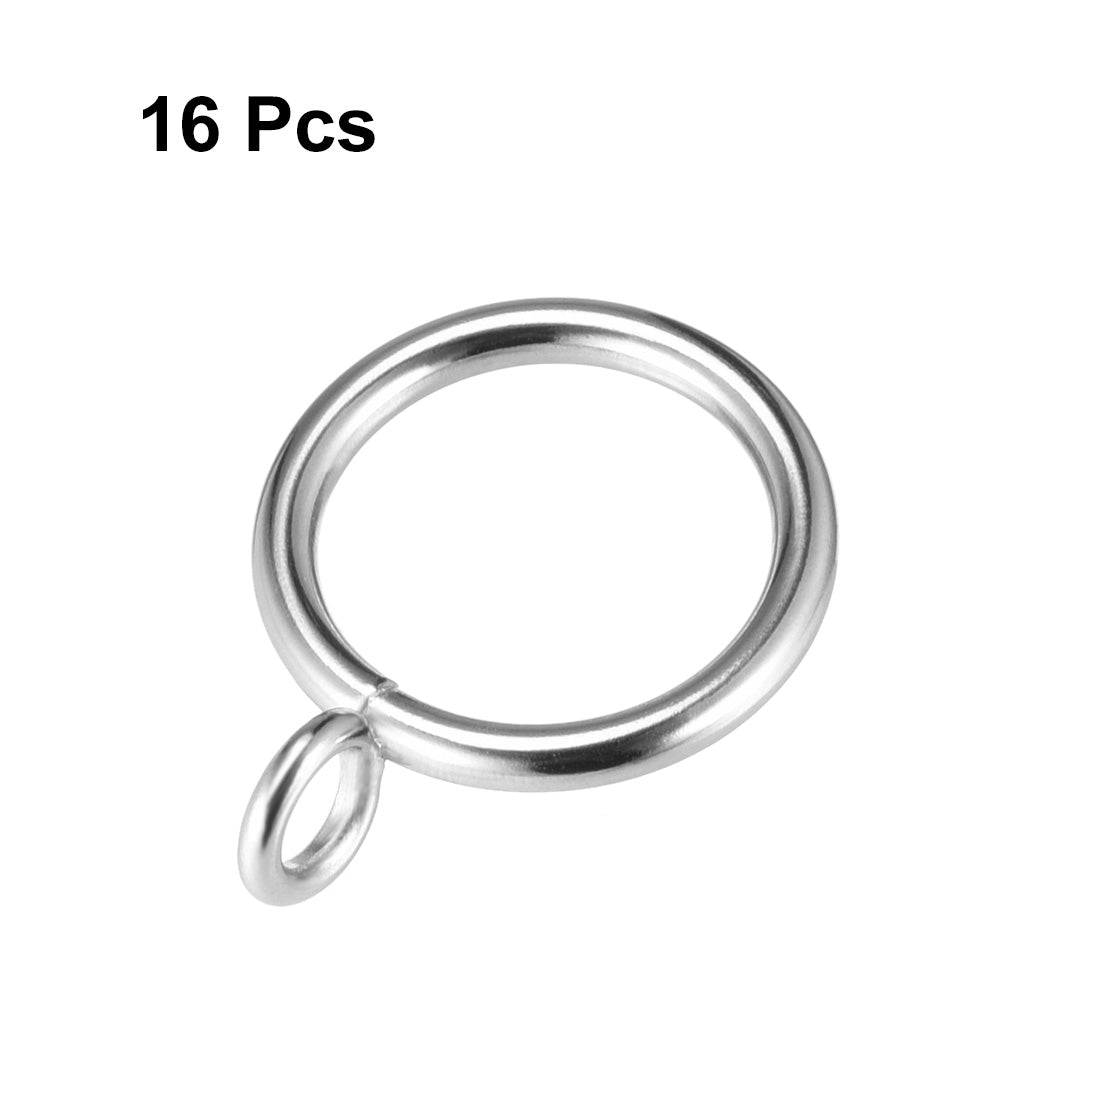 Uxcell Uxcell Curtain Rings Metal 28mm Inner Dia Drapery Ring for Curtain Rods Silver Tone 16 Pcs